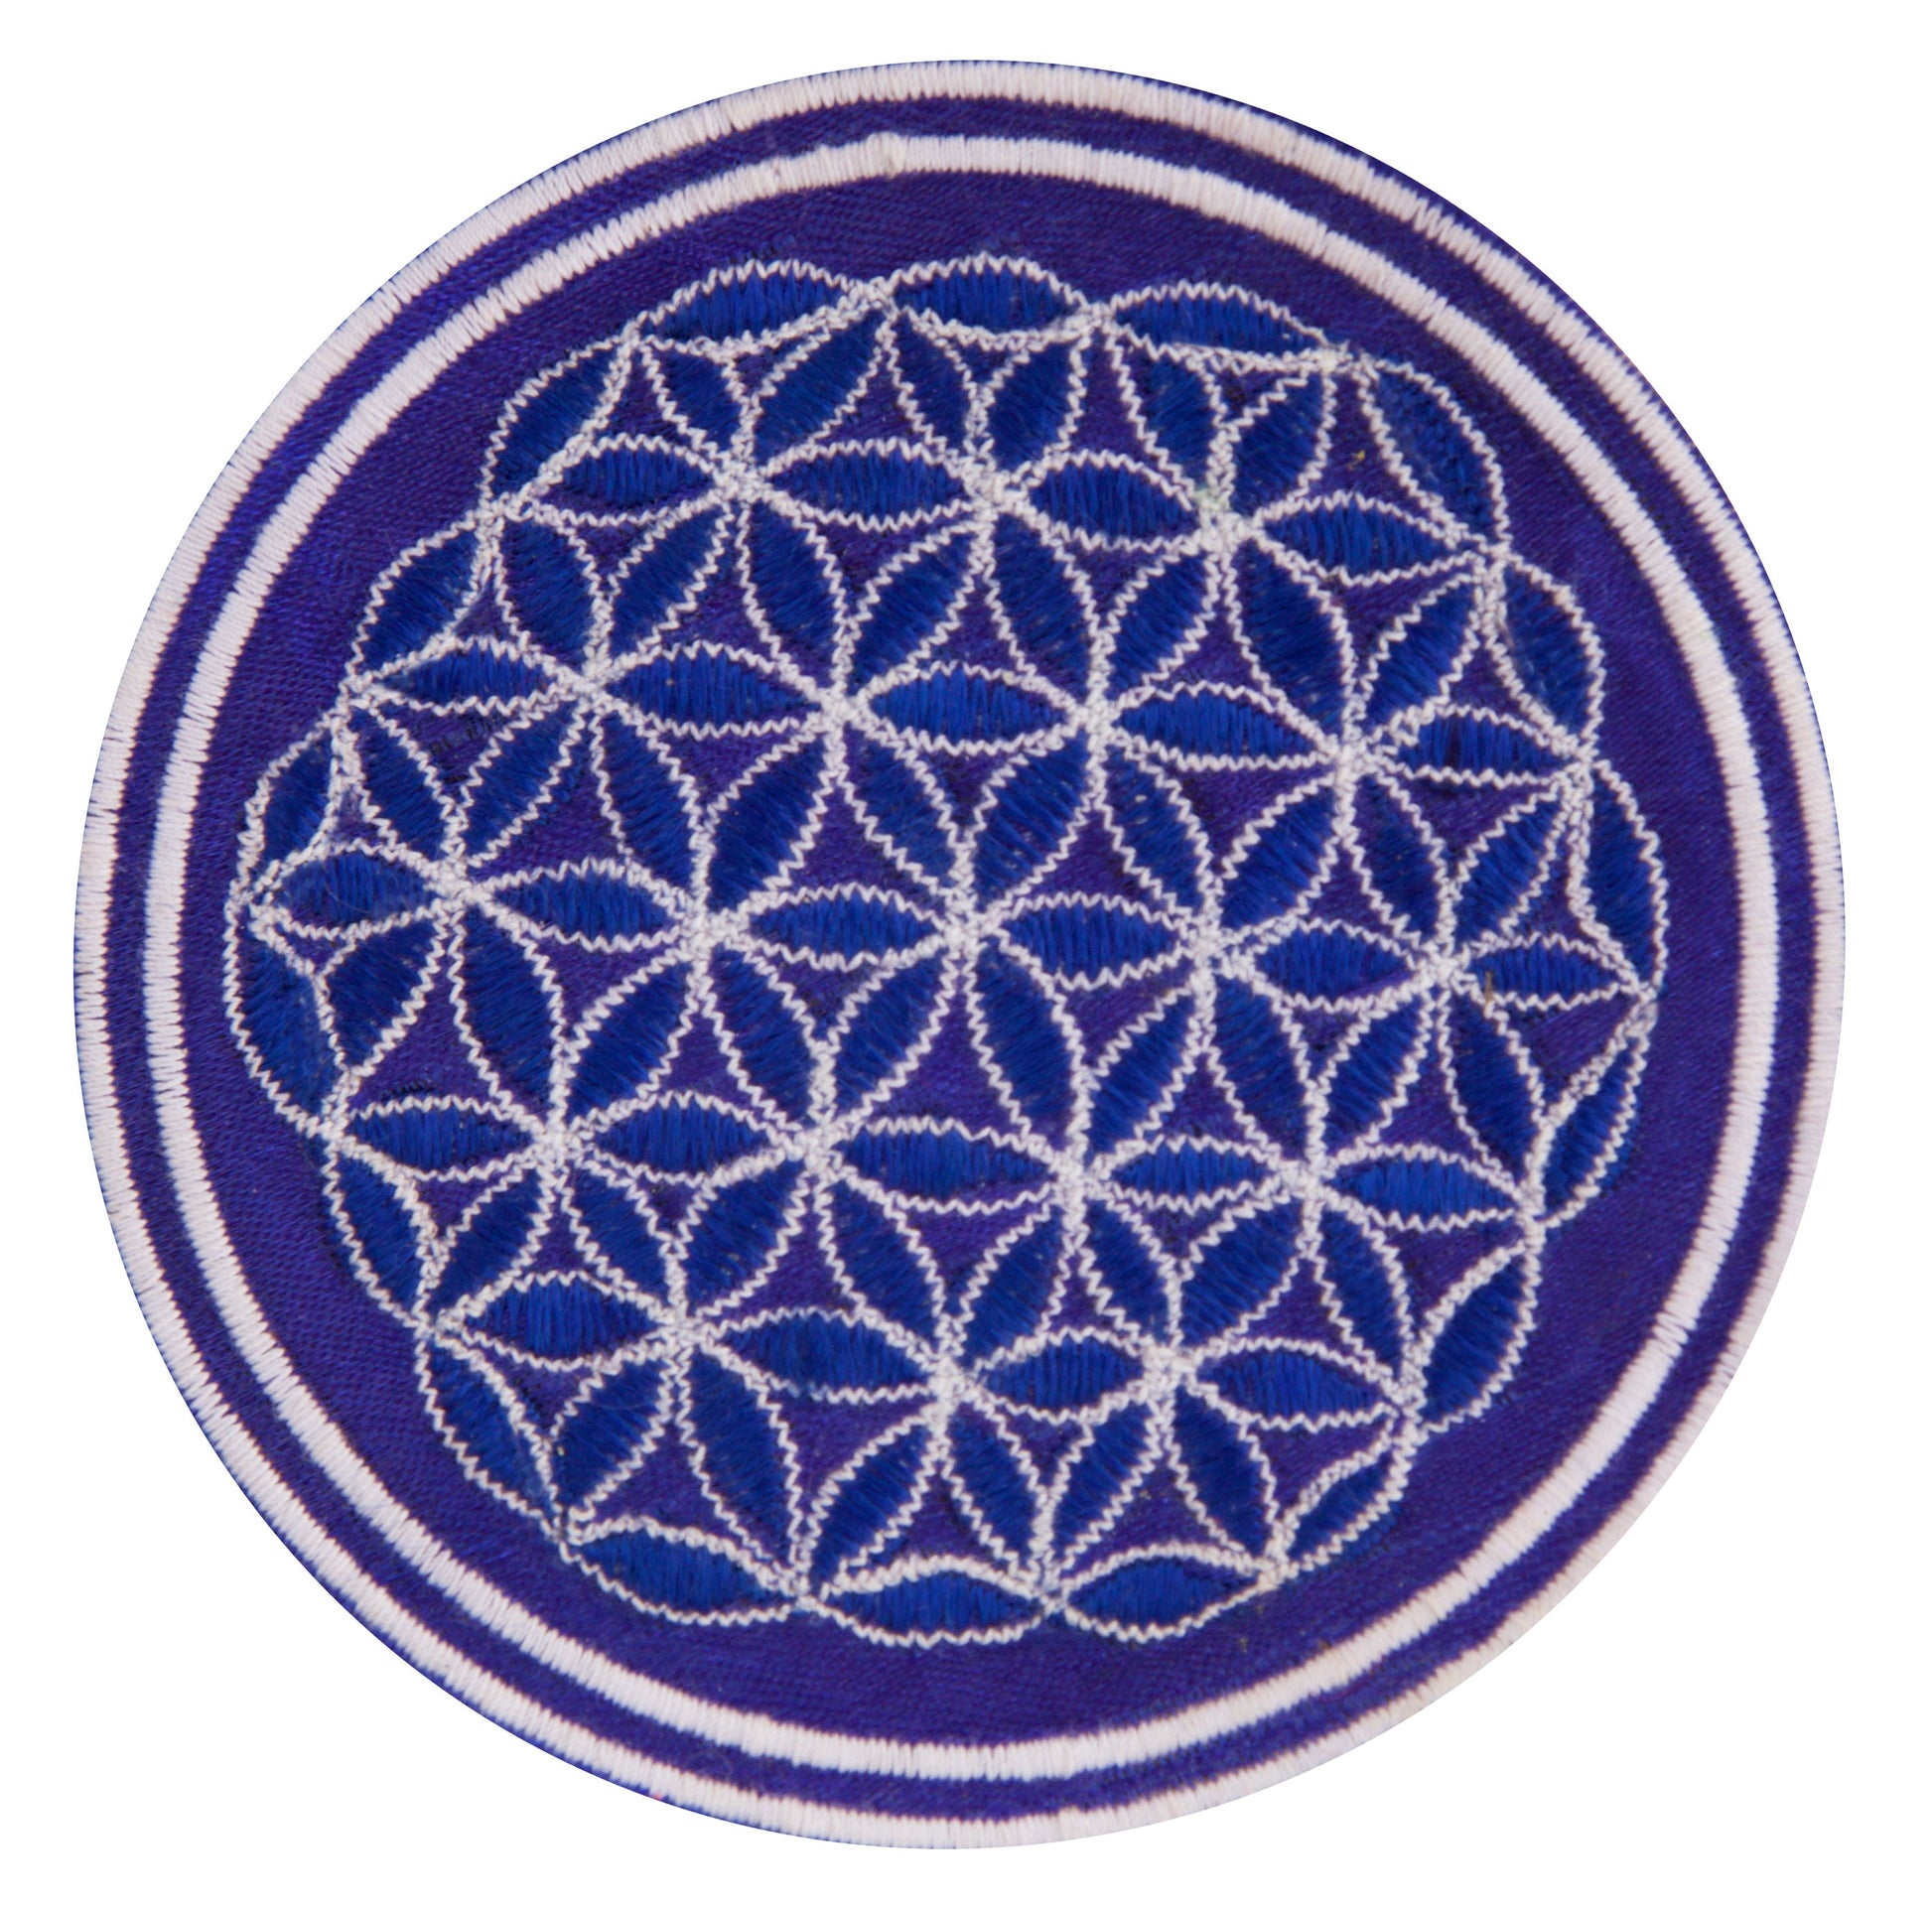 White pink flower of life patch sacred geometry embroidery for sew on